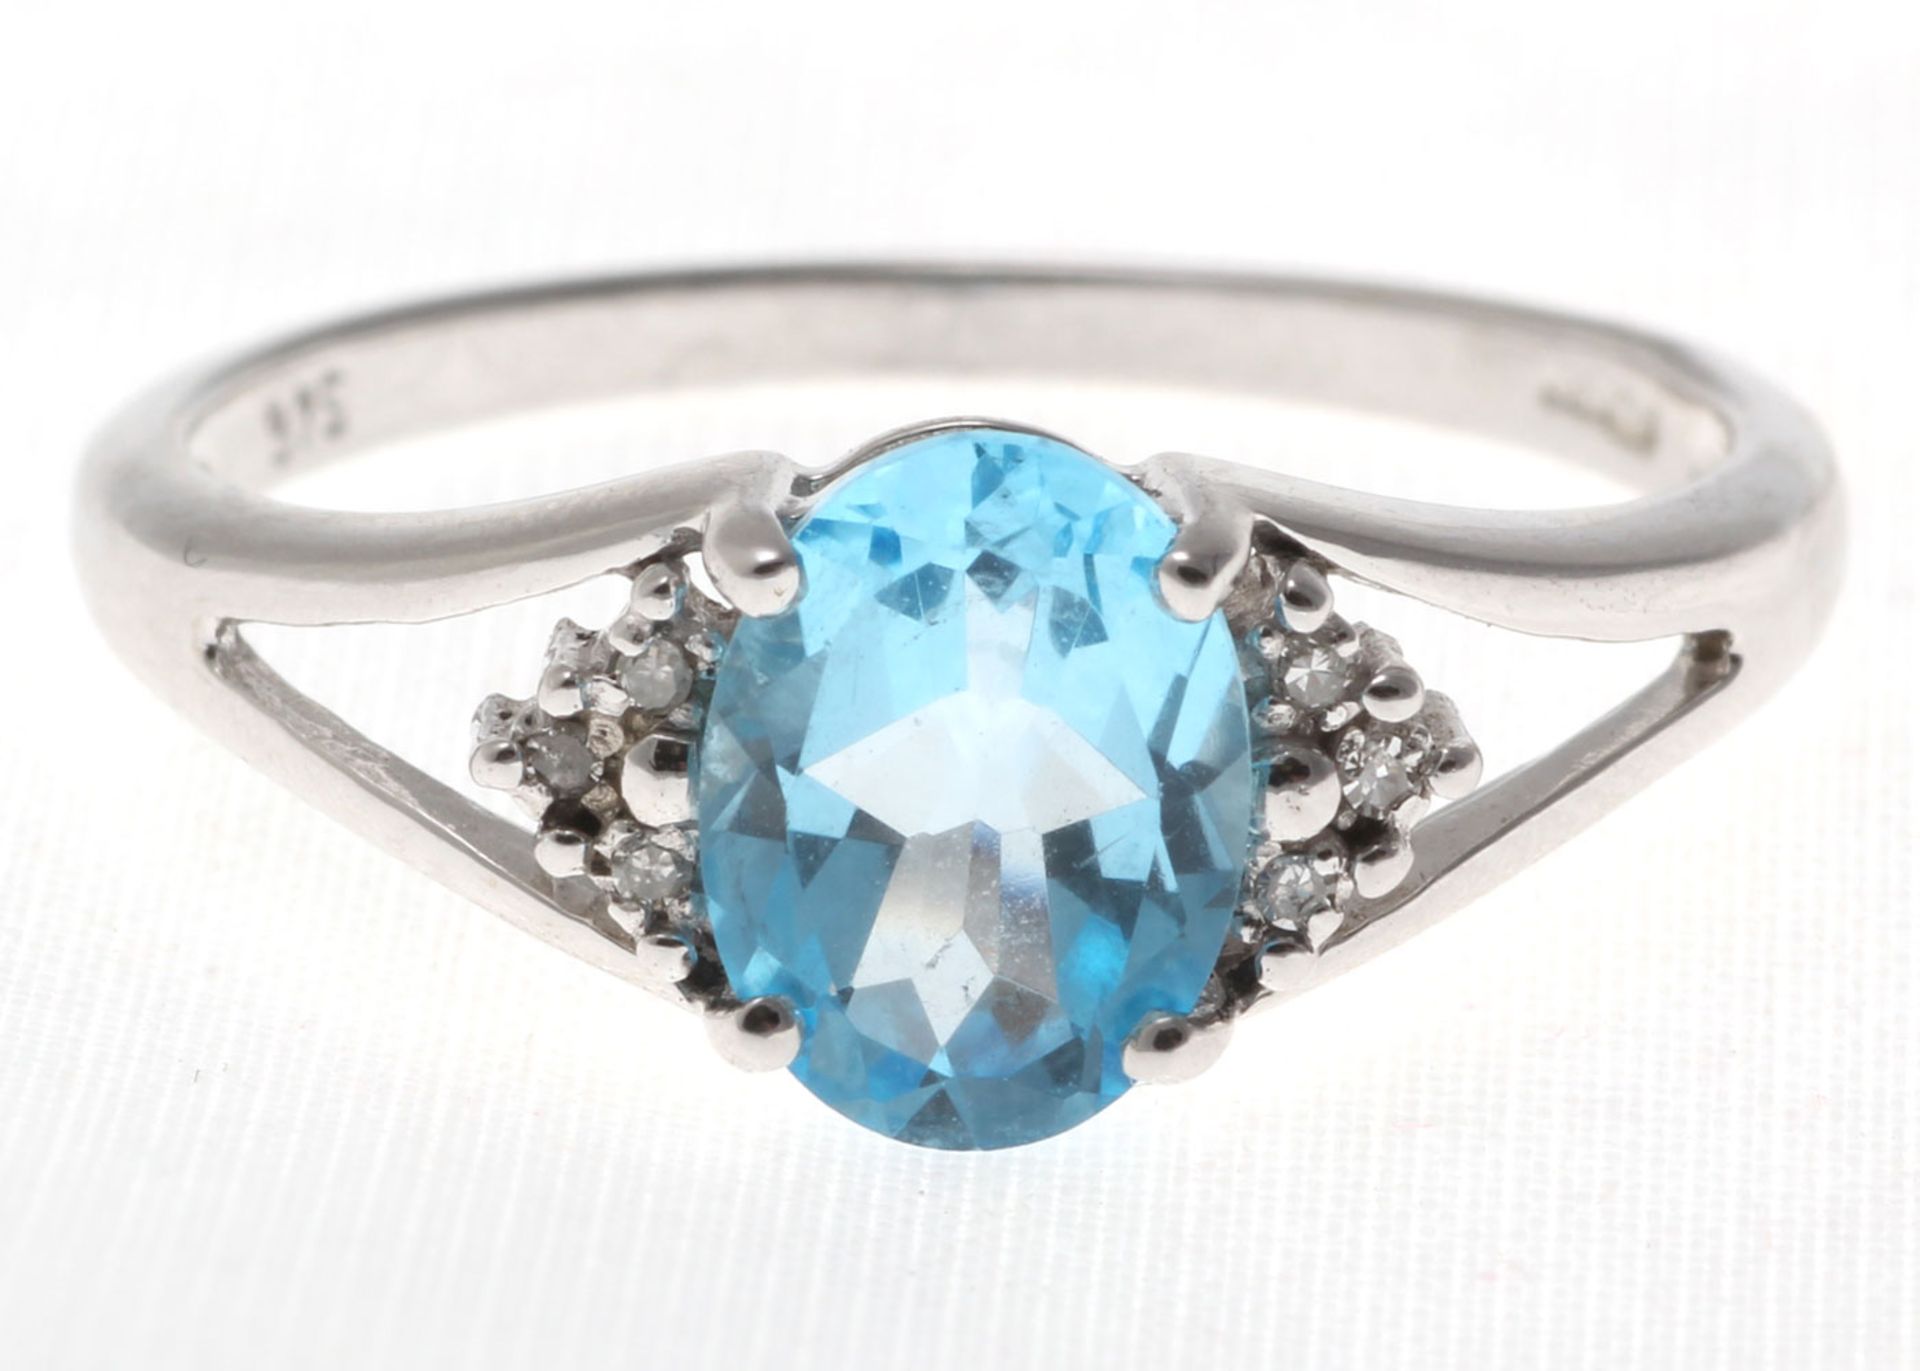 9ct White Gold Diamond And Blue Topaz Ring 0.02 Carats - Valued by GIE £855.00 - This stunning - Image 5 of 6